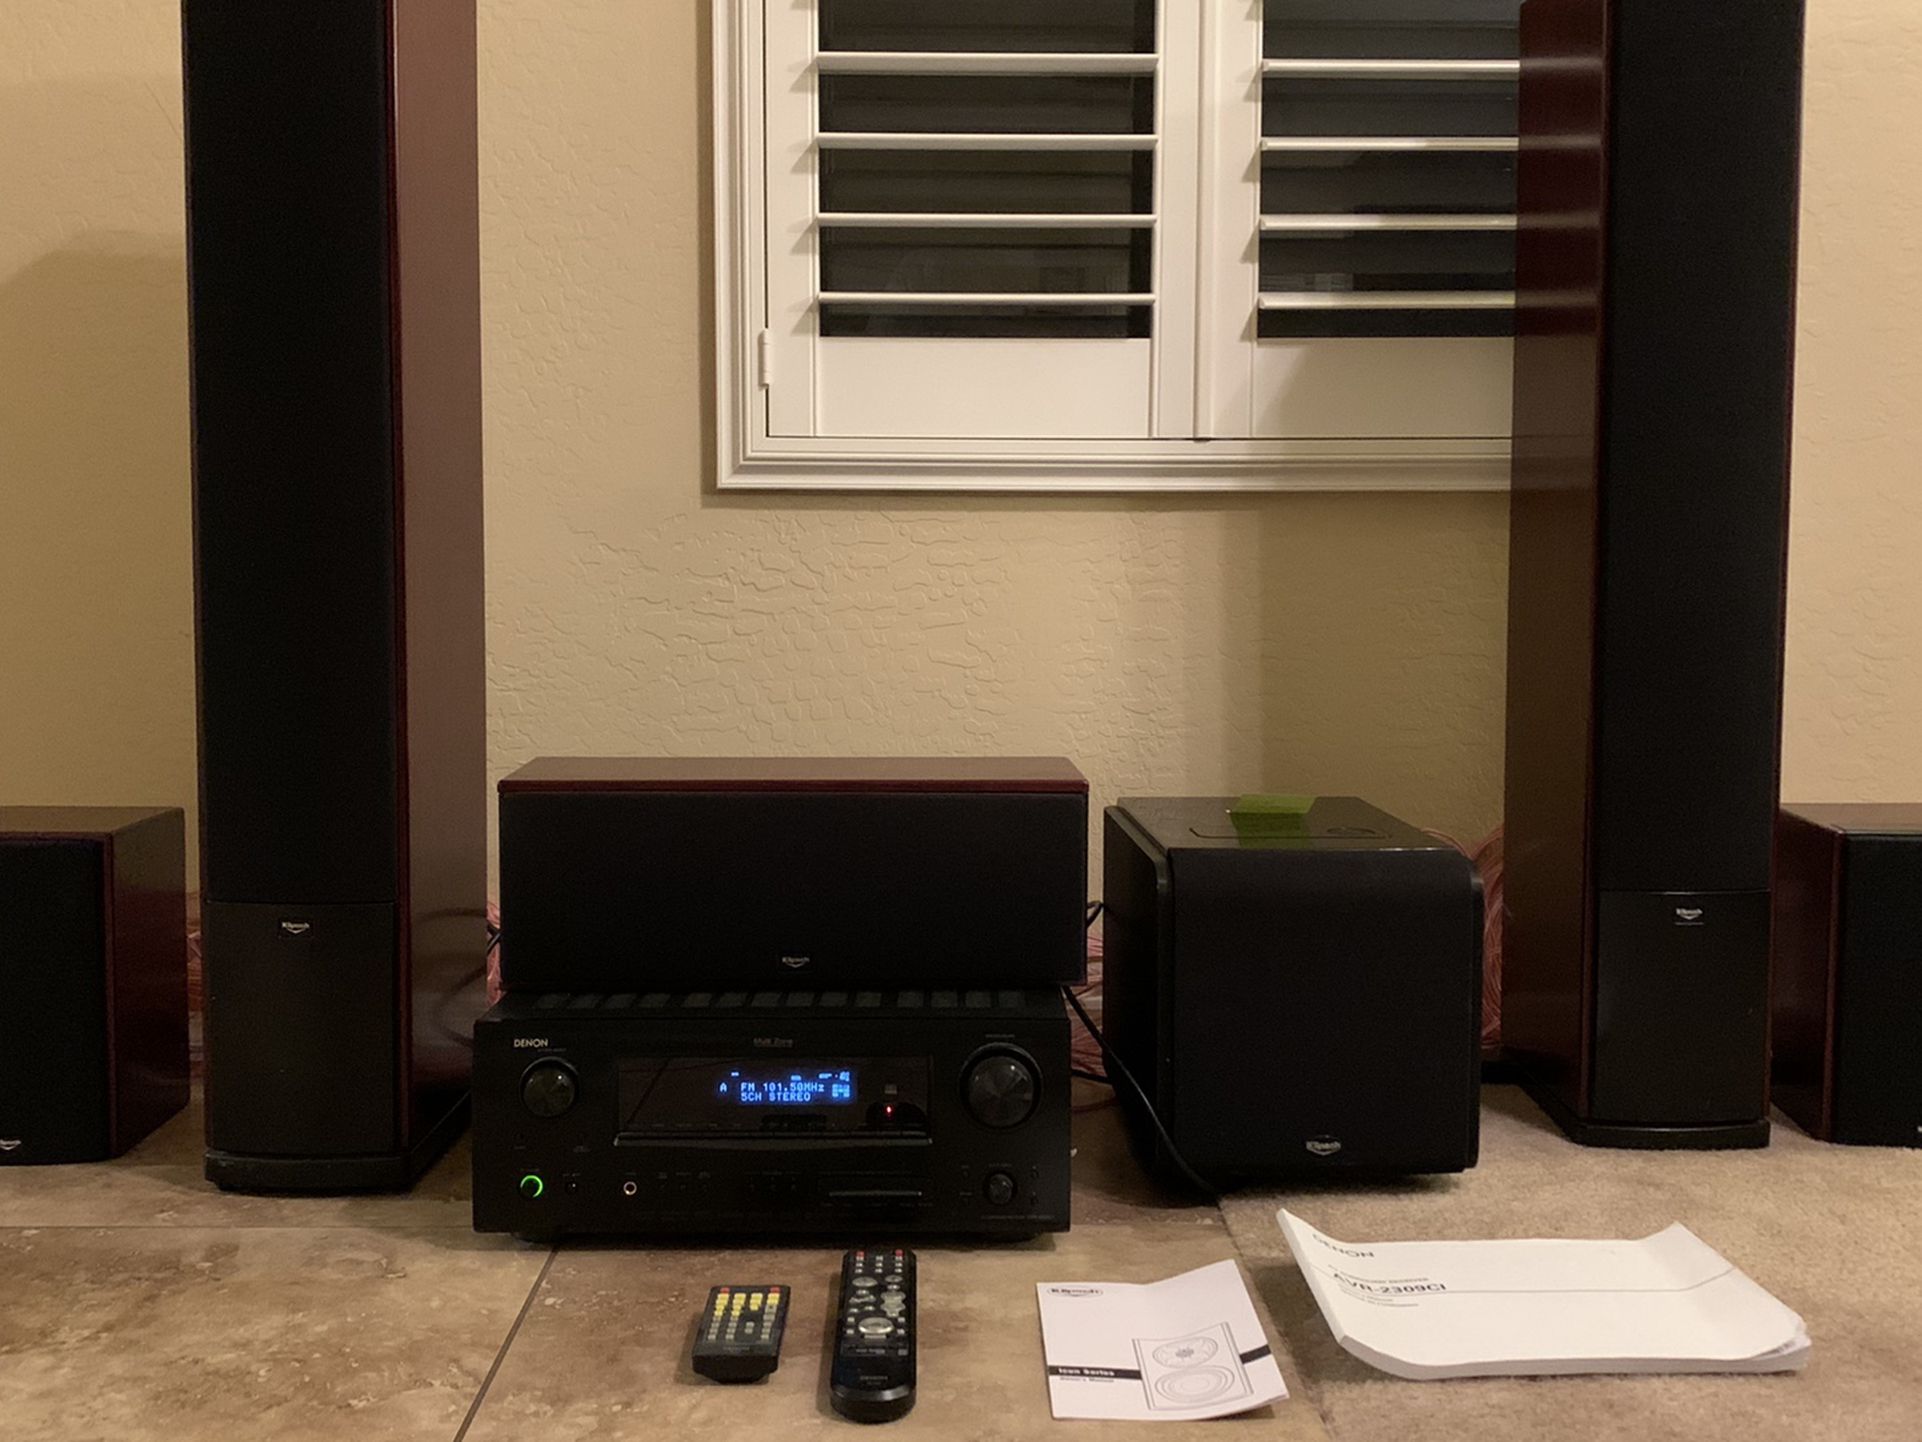 Klipsch Speakers with Denon Receiver. Read details due To subwoofer and receiver not functioning properly.